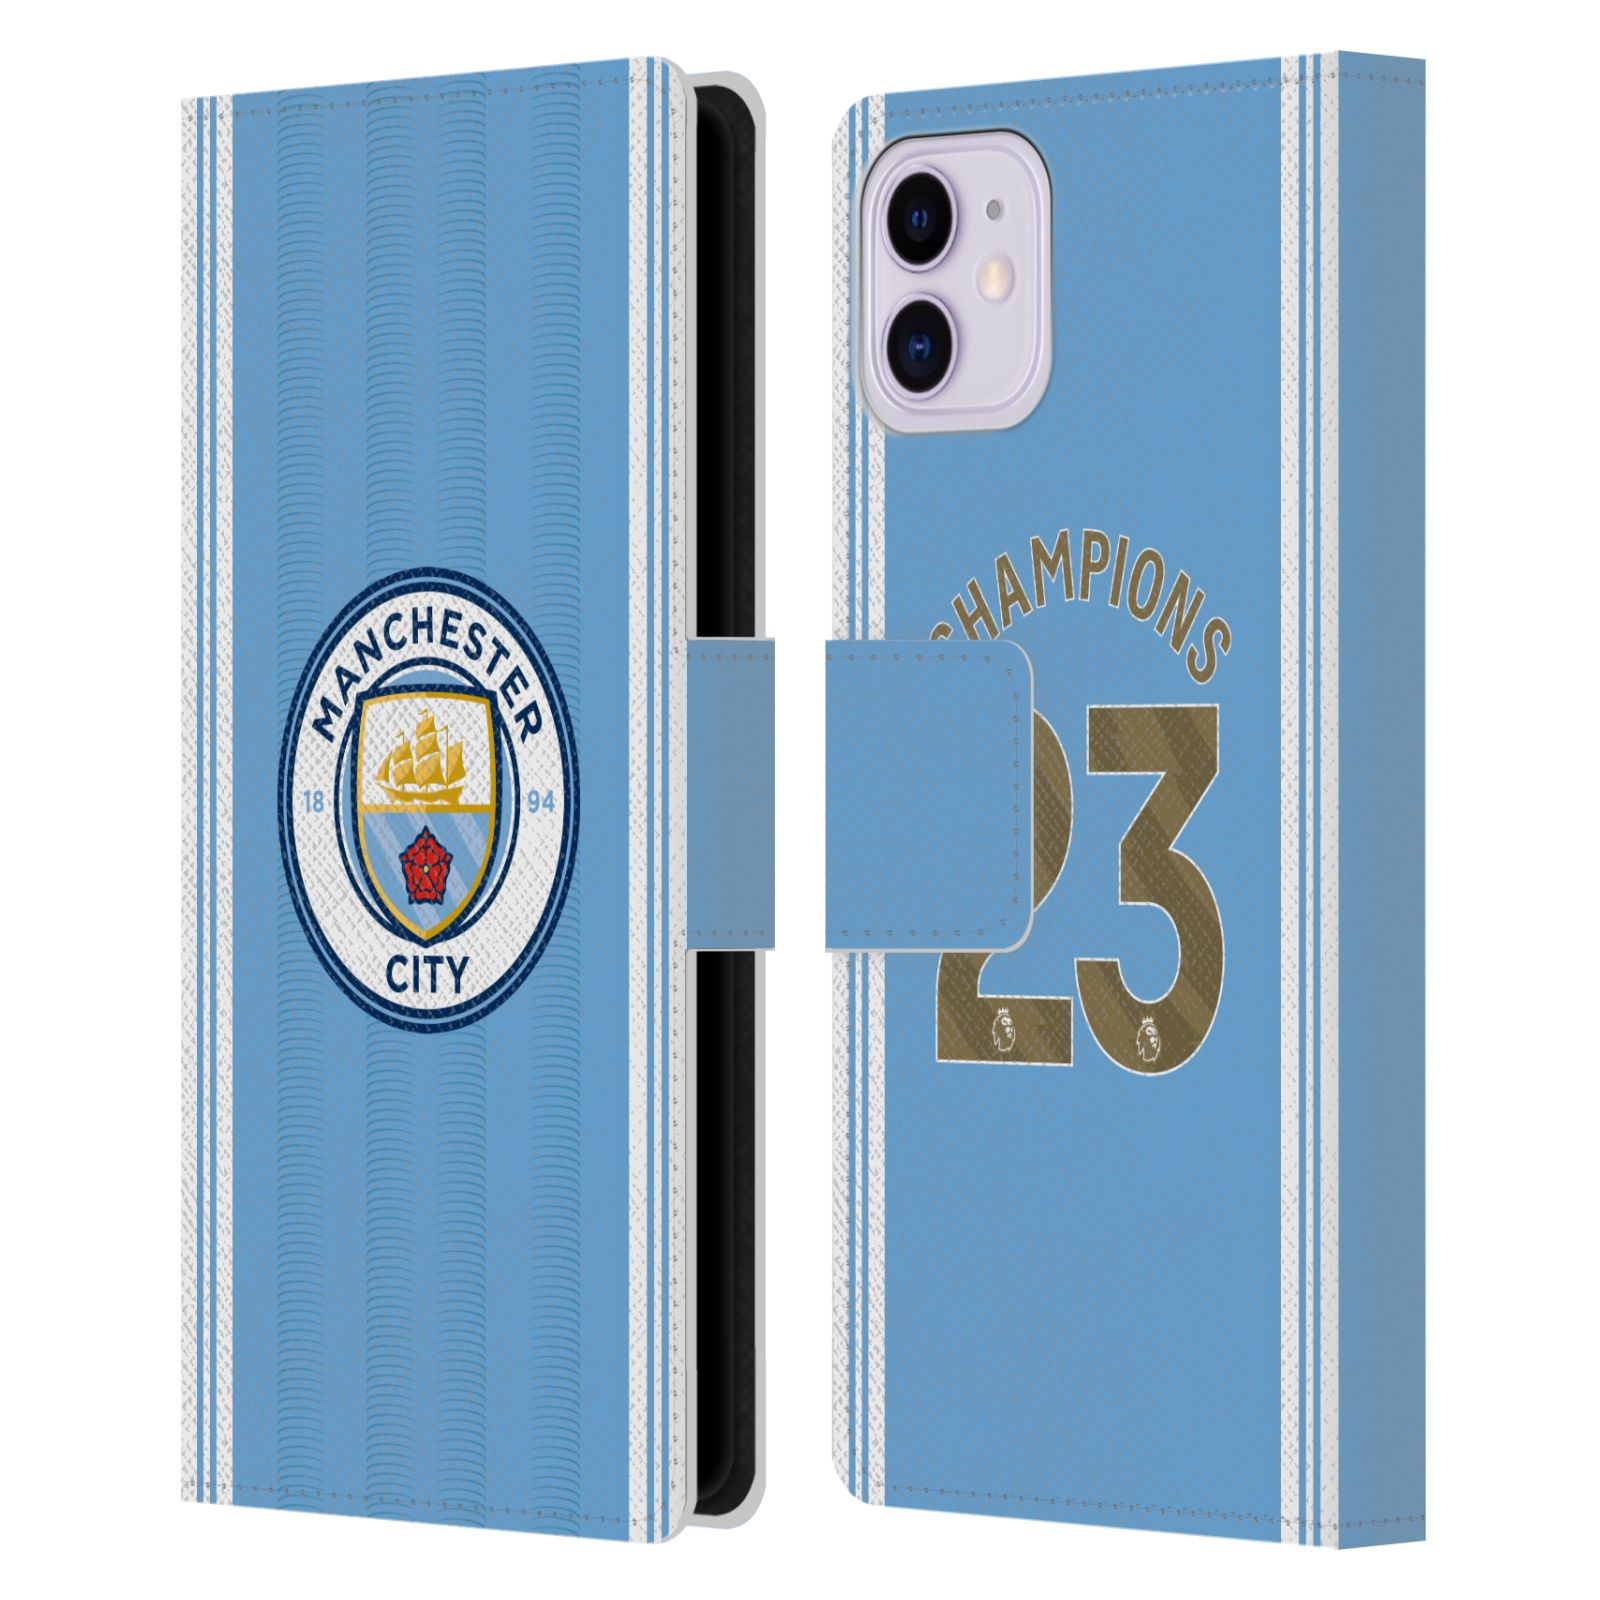 Pouzdro na mobil Apple Iphone 11 - HEAD CASE - Manchester City - Champions dres 2